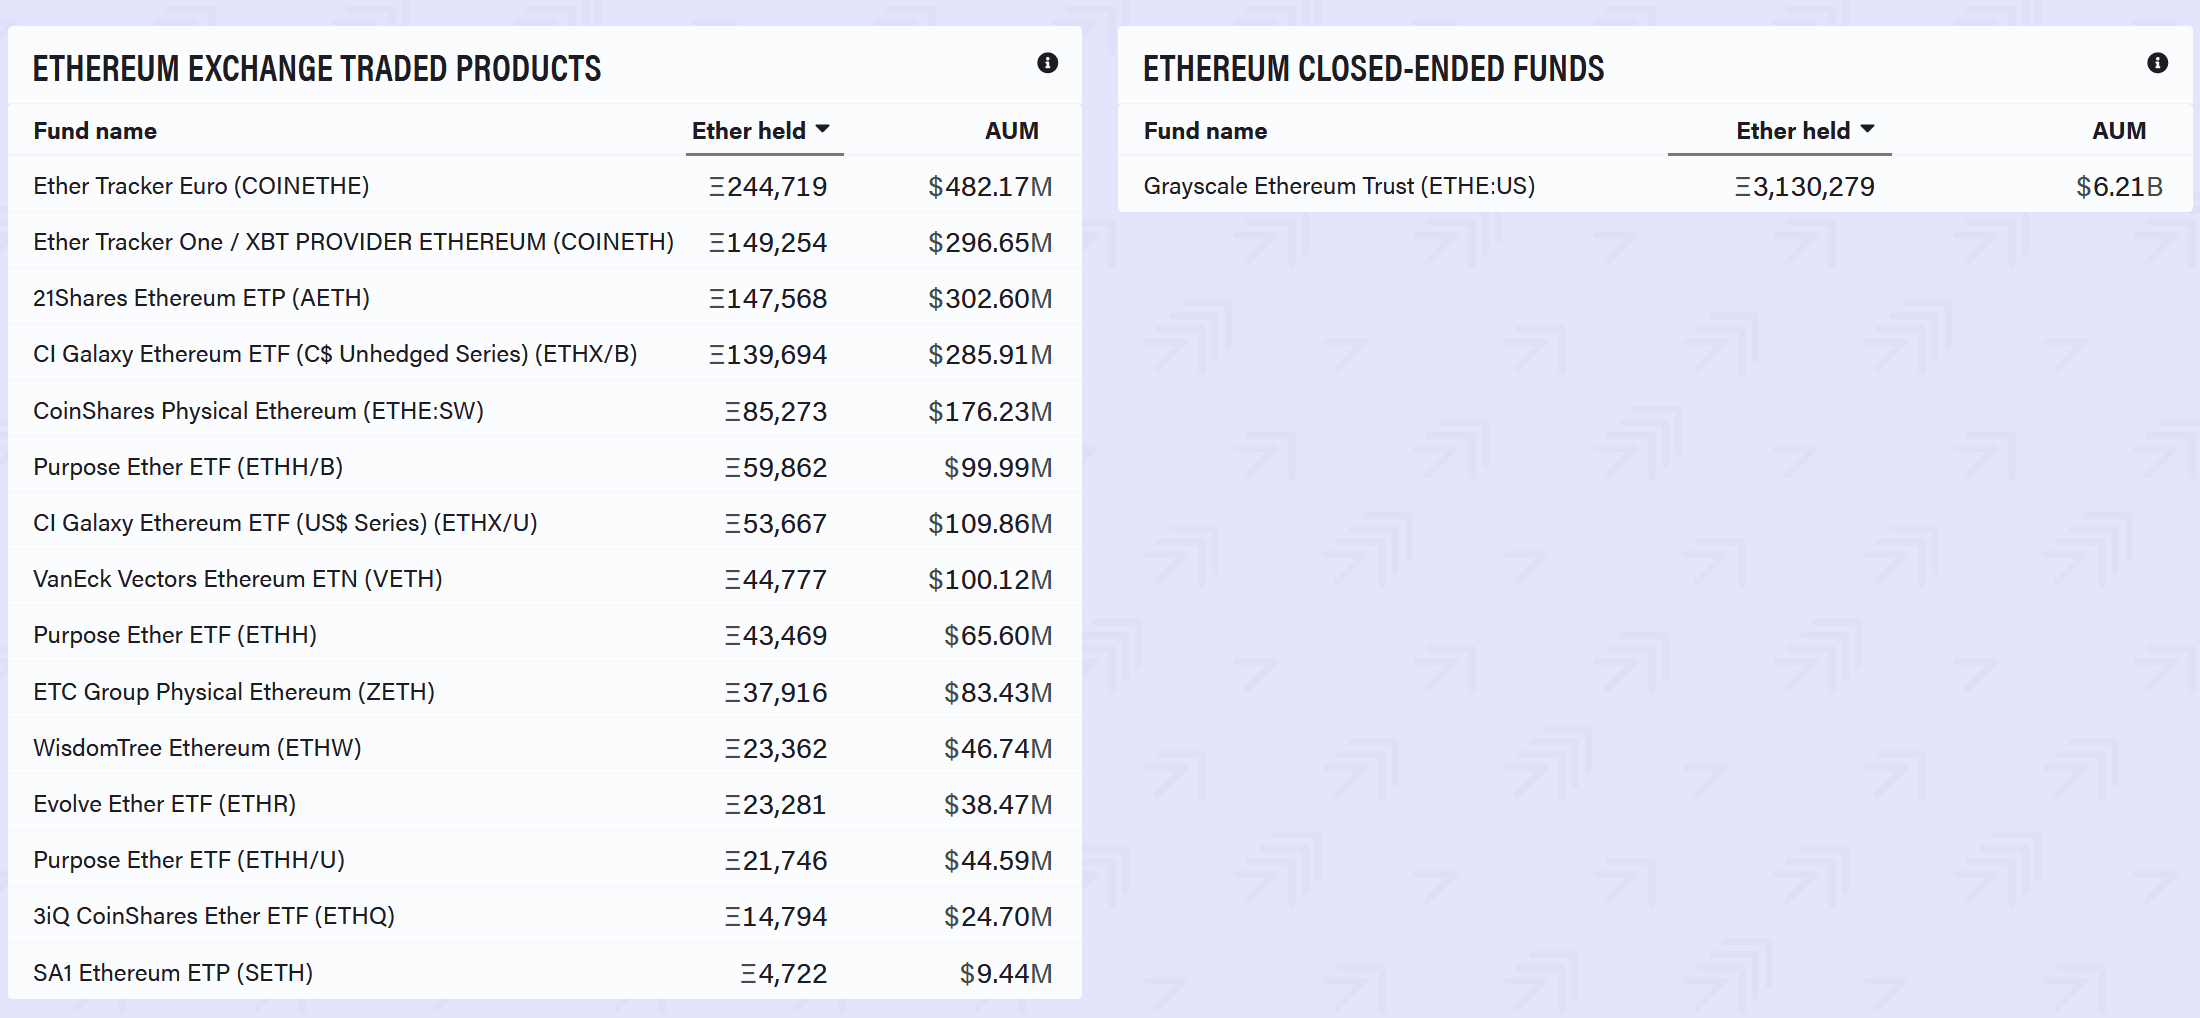 Ethereum holdings of the largest funds at a glance. Source: Bytetree